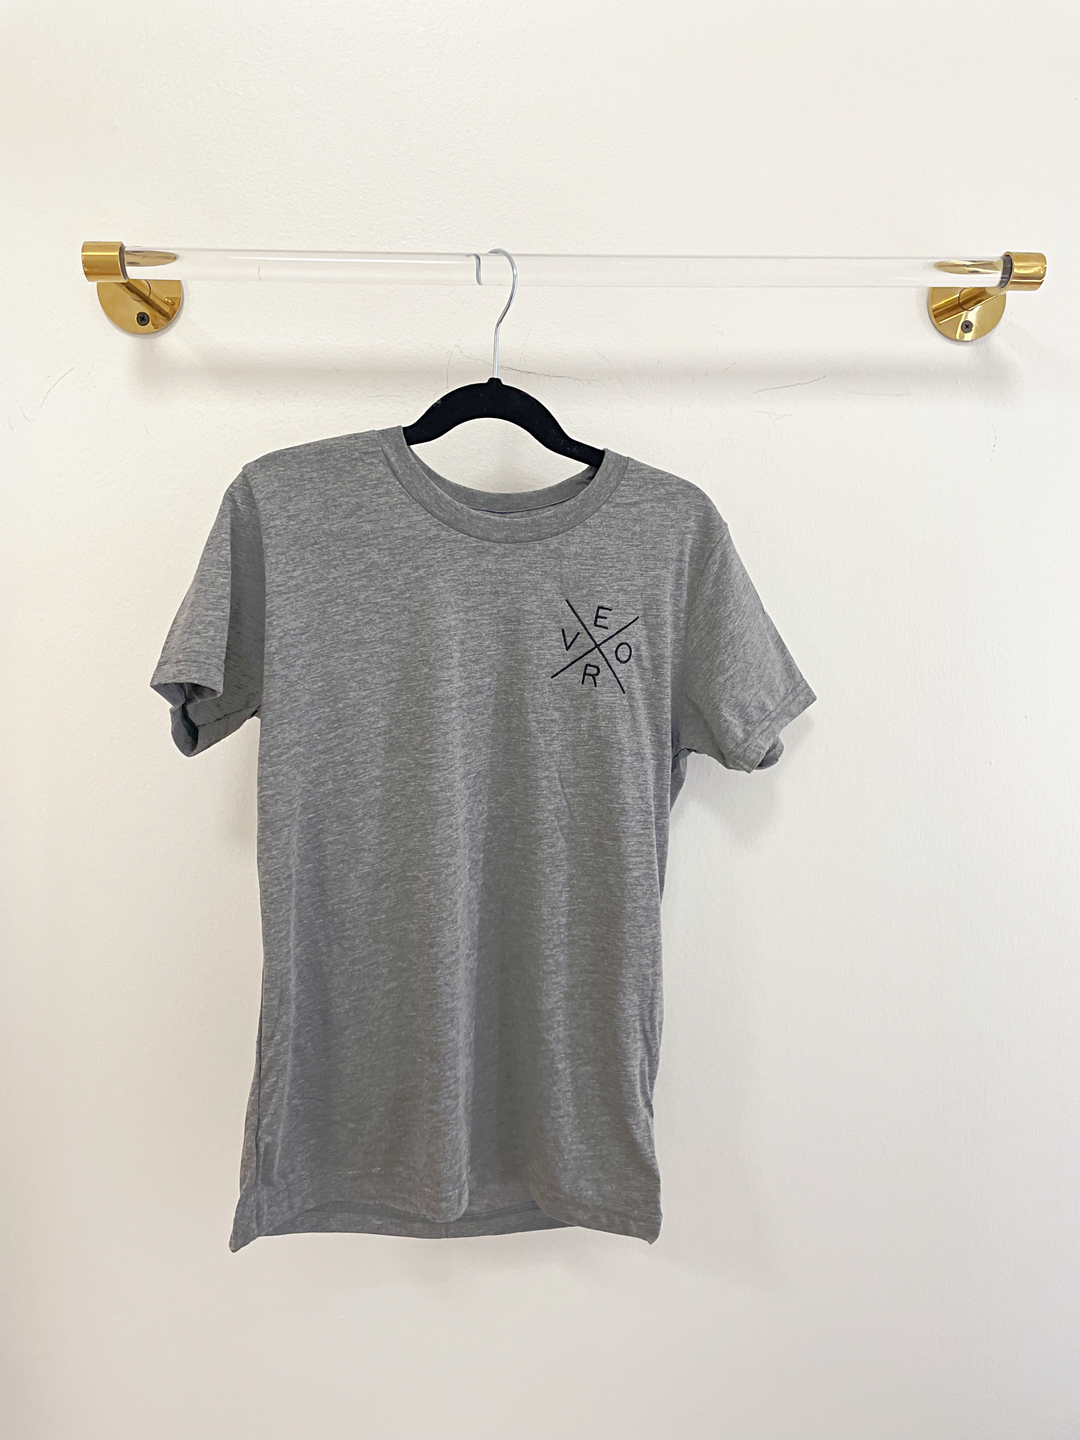 Vero Youth Tee - Kids, Grey (Embroidered)